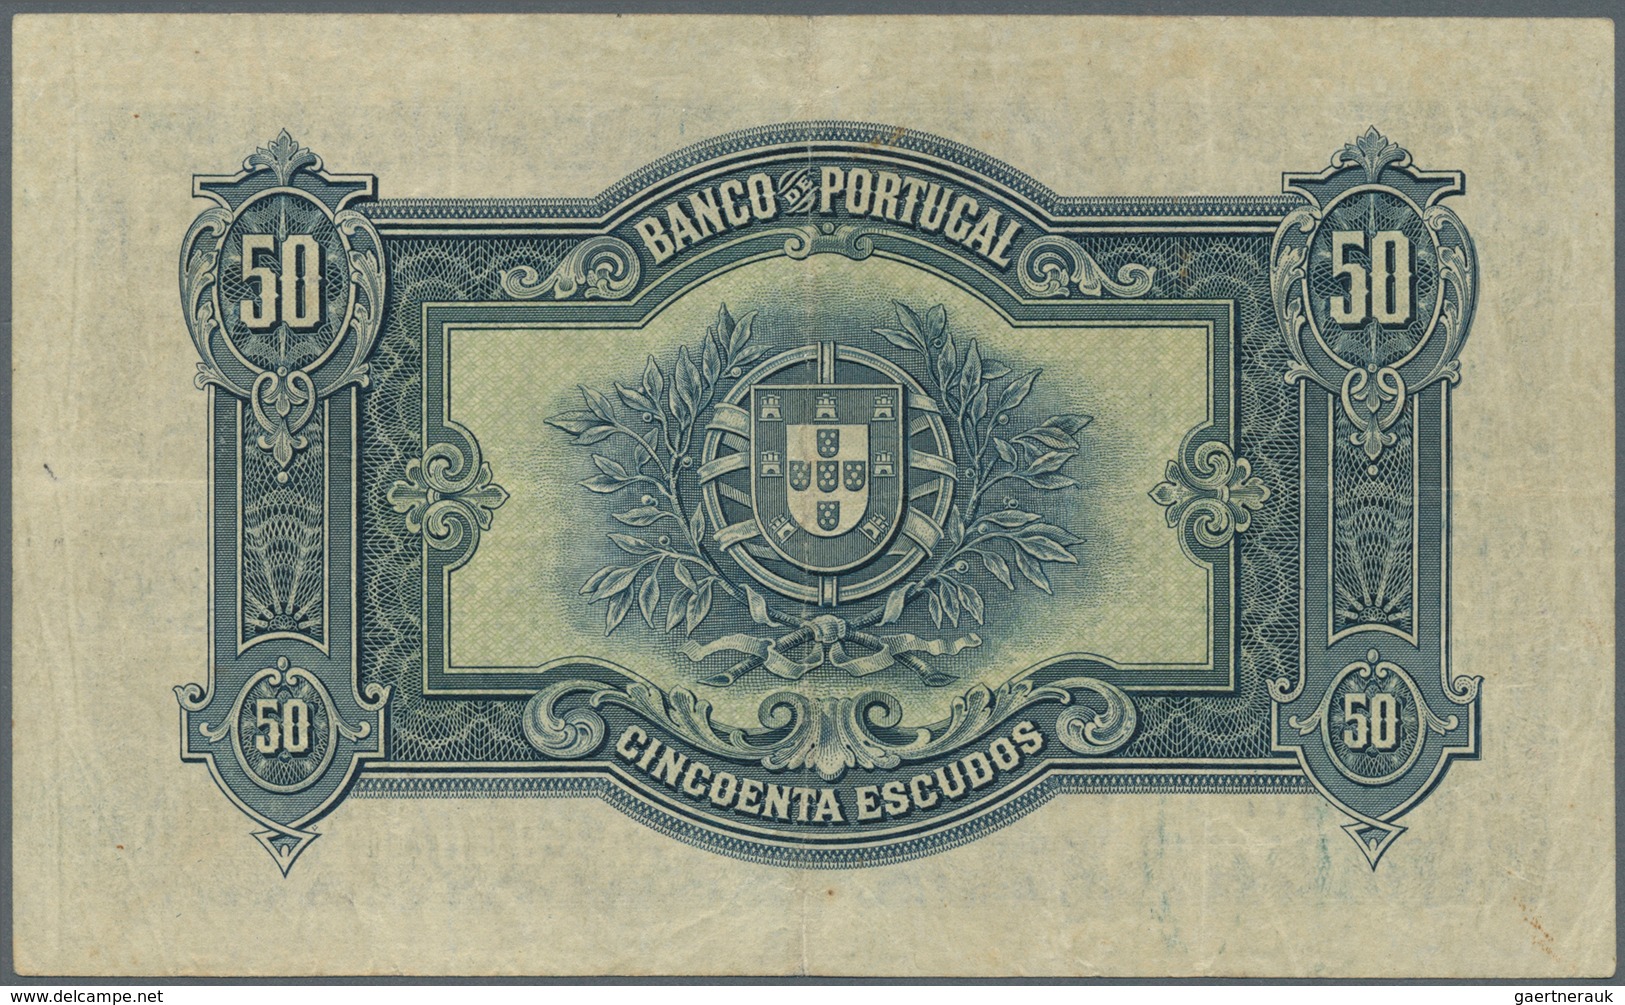 Portugal: 50 Escudos 1925 P. 136, Center And Horizontal Fold, Light Handling In Paper, No Holes Or T - Portugal